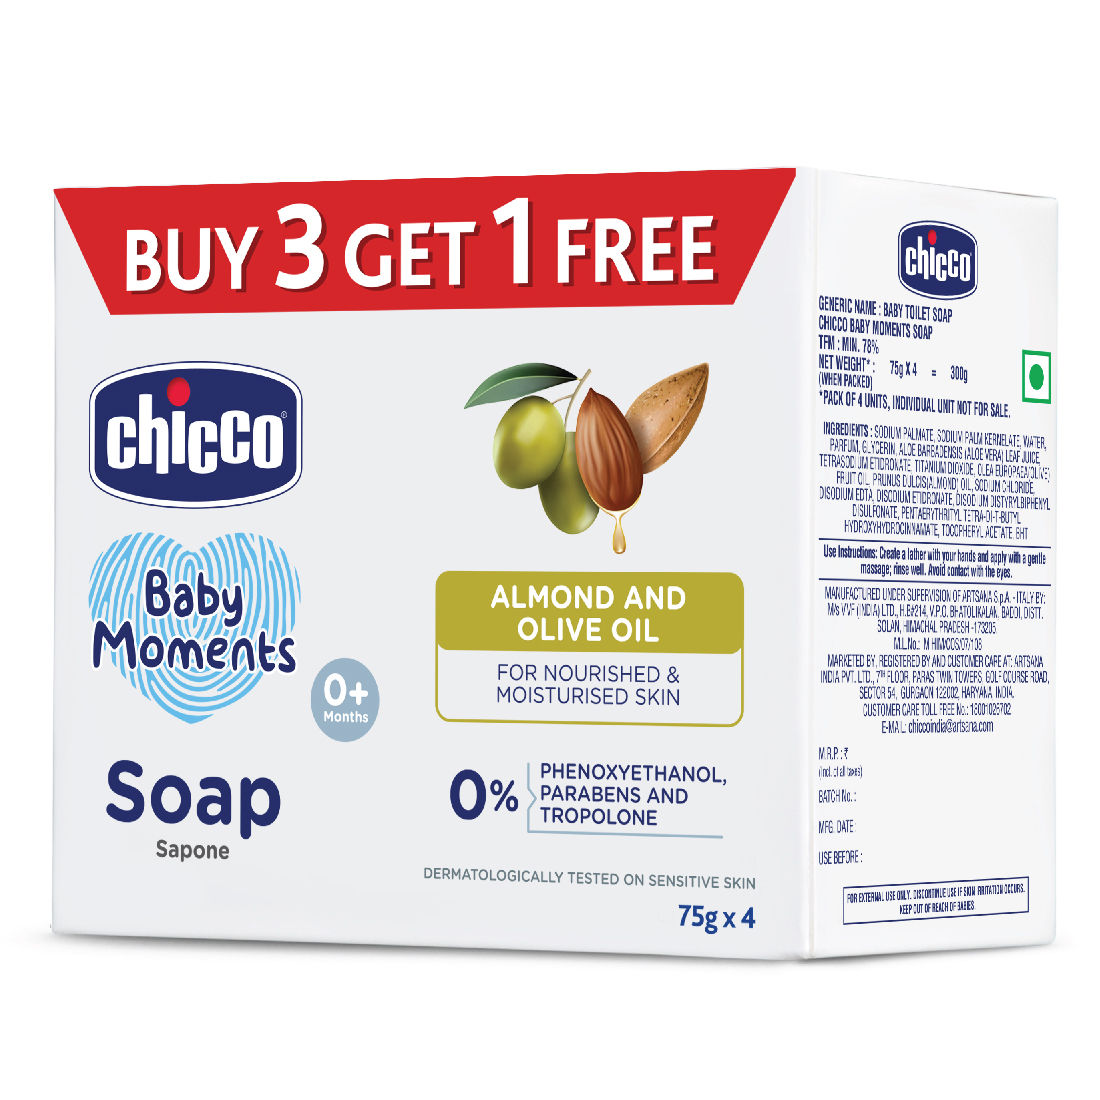 Chicco Baby Moments Protect Mild Body Wash, 500 ml Price, Uses, Side  Effects, Composition - Apollo Pharmacy